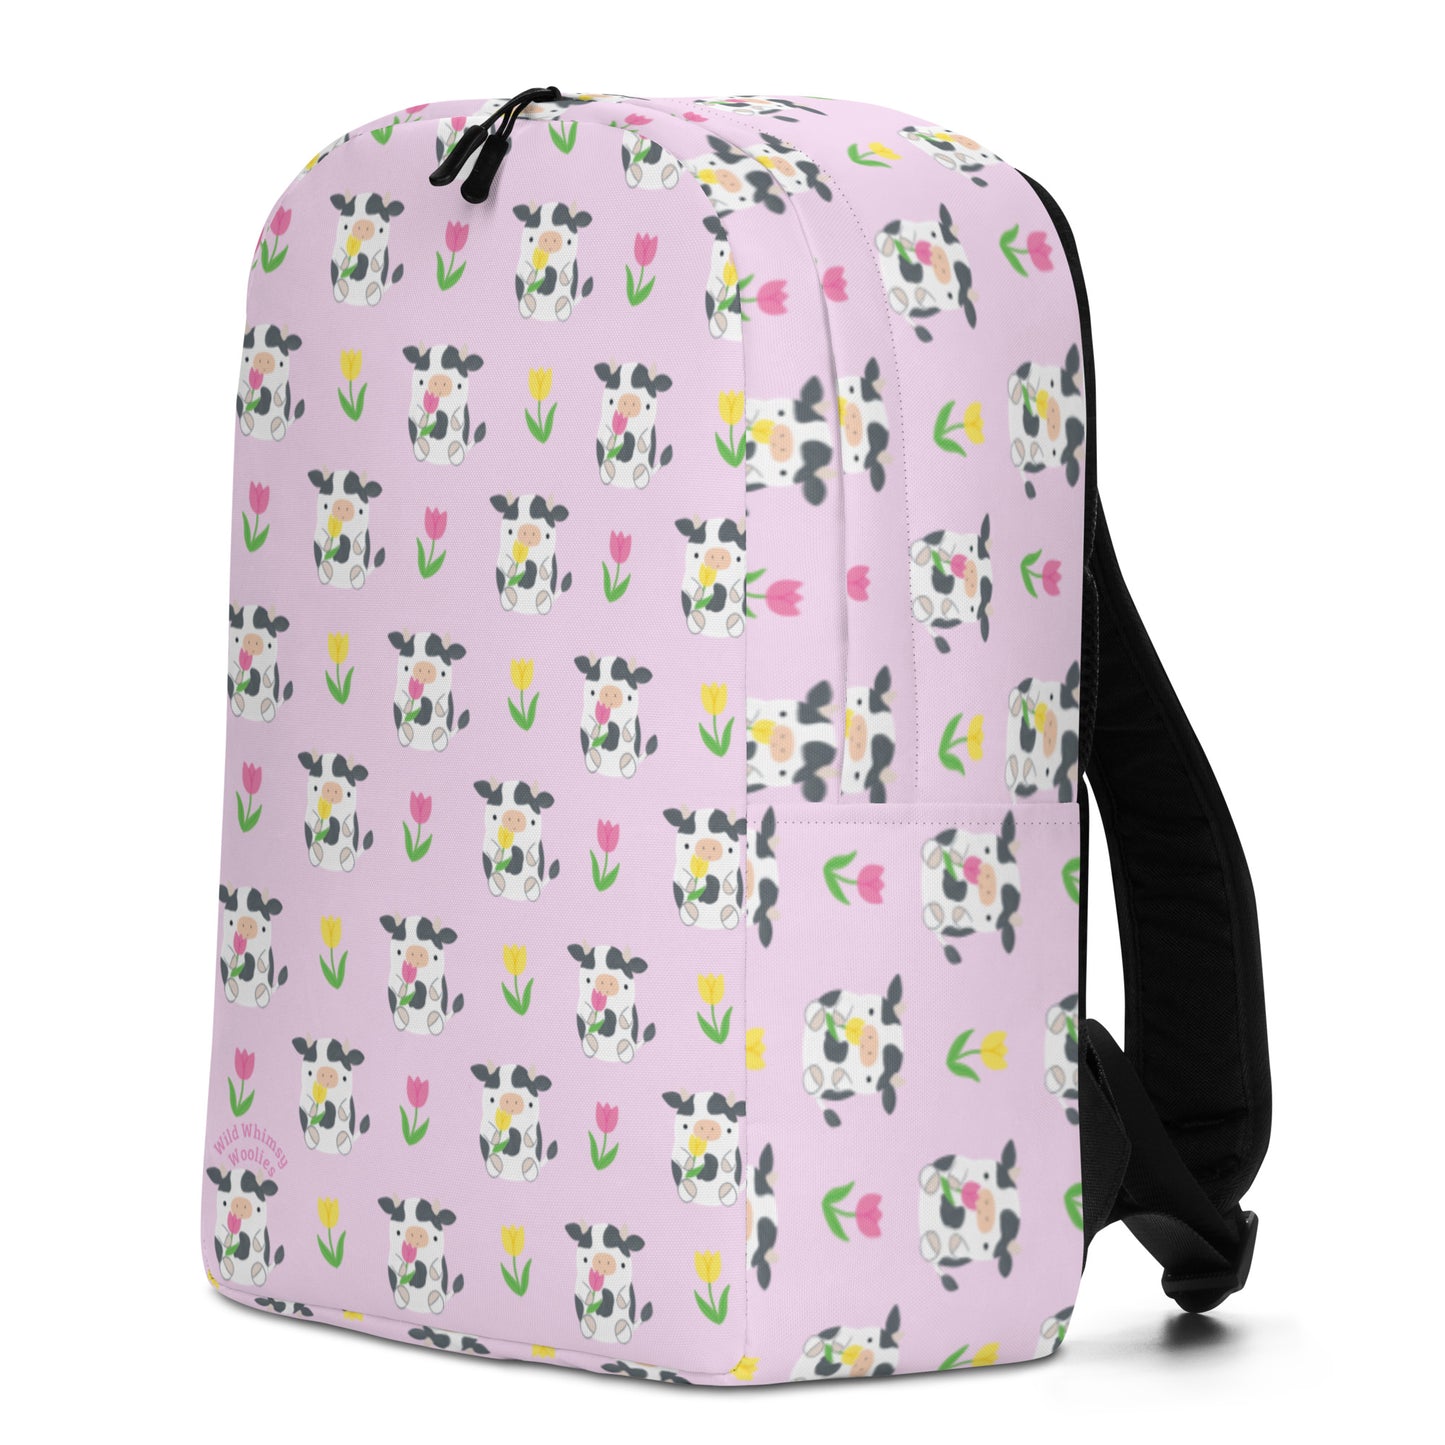 Tulip Cows Minimalist Backpack - Lilac by Wild Whimsy Woolies